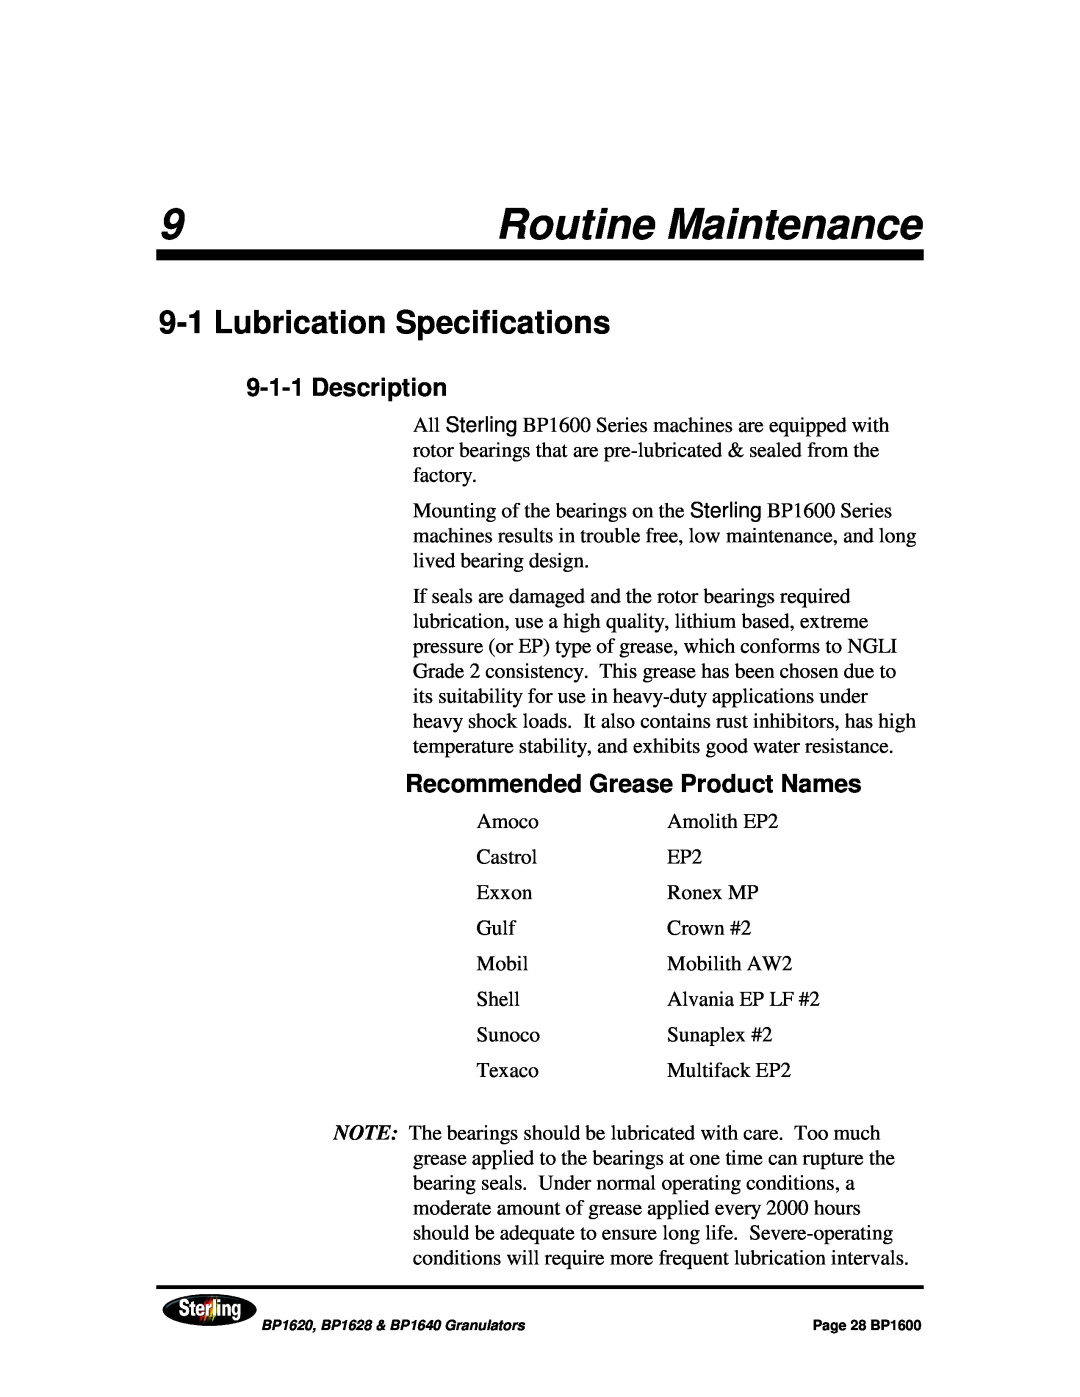 Sterling BP1640 Routine Maintenance, 9-1Lubrication Specifications, 9-1-1Description, Recommended Grease Product Names 